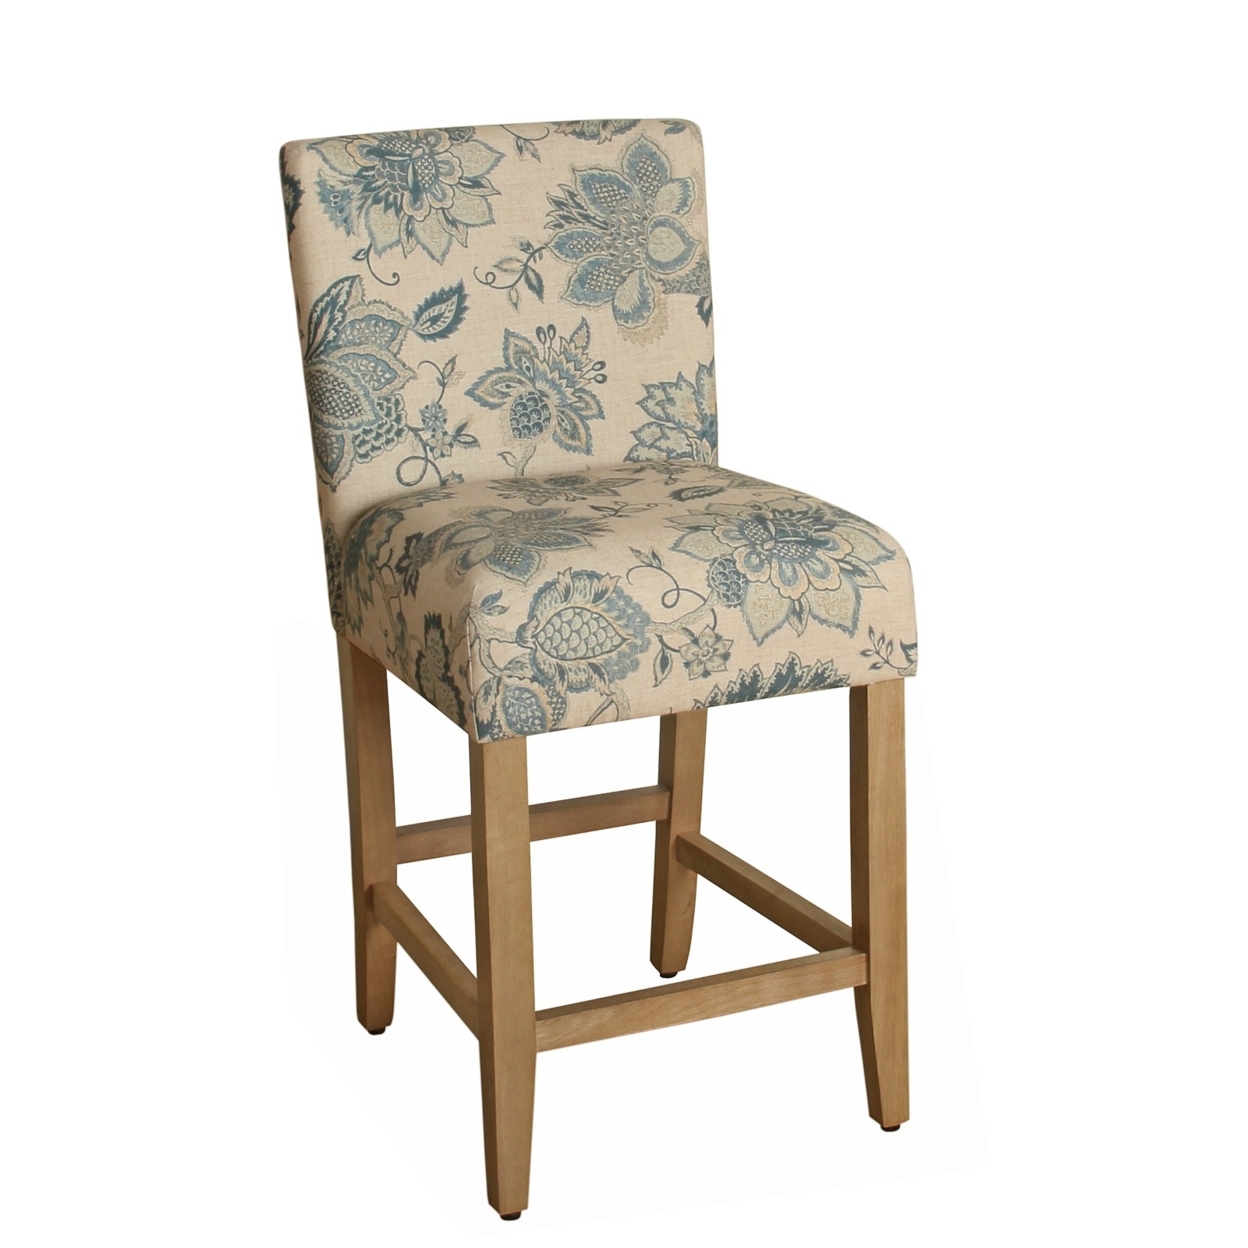 Wooden Counter Height Stool With Floral Pattern Fabric Upholstery, Beige And Blue- Saltoro Sherpi